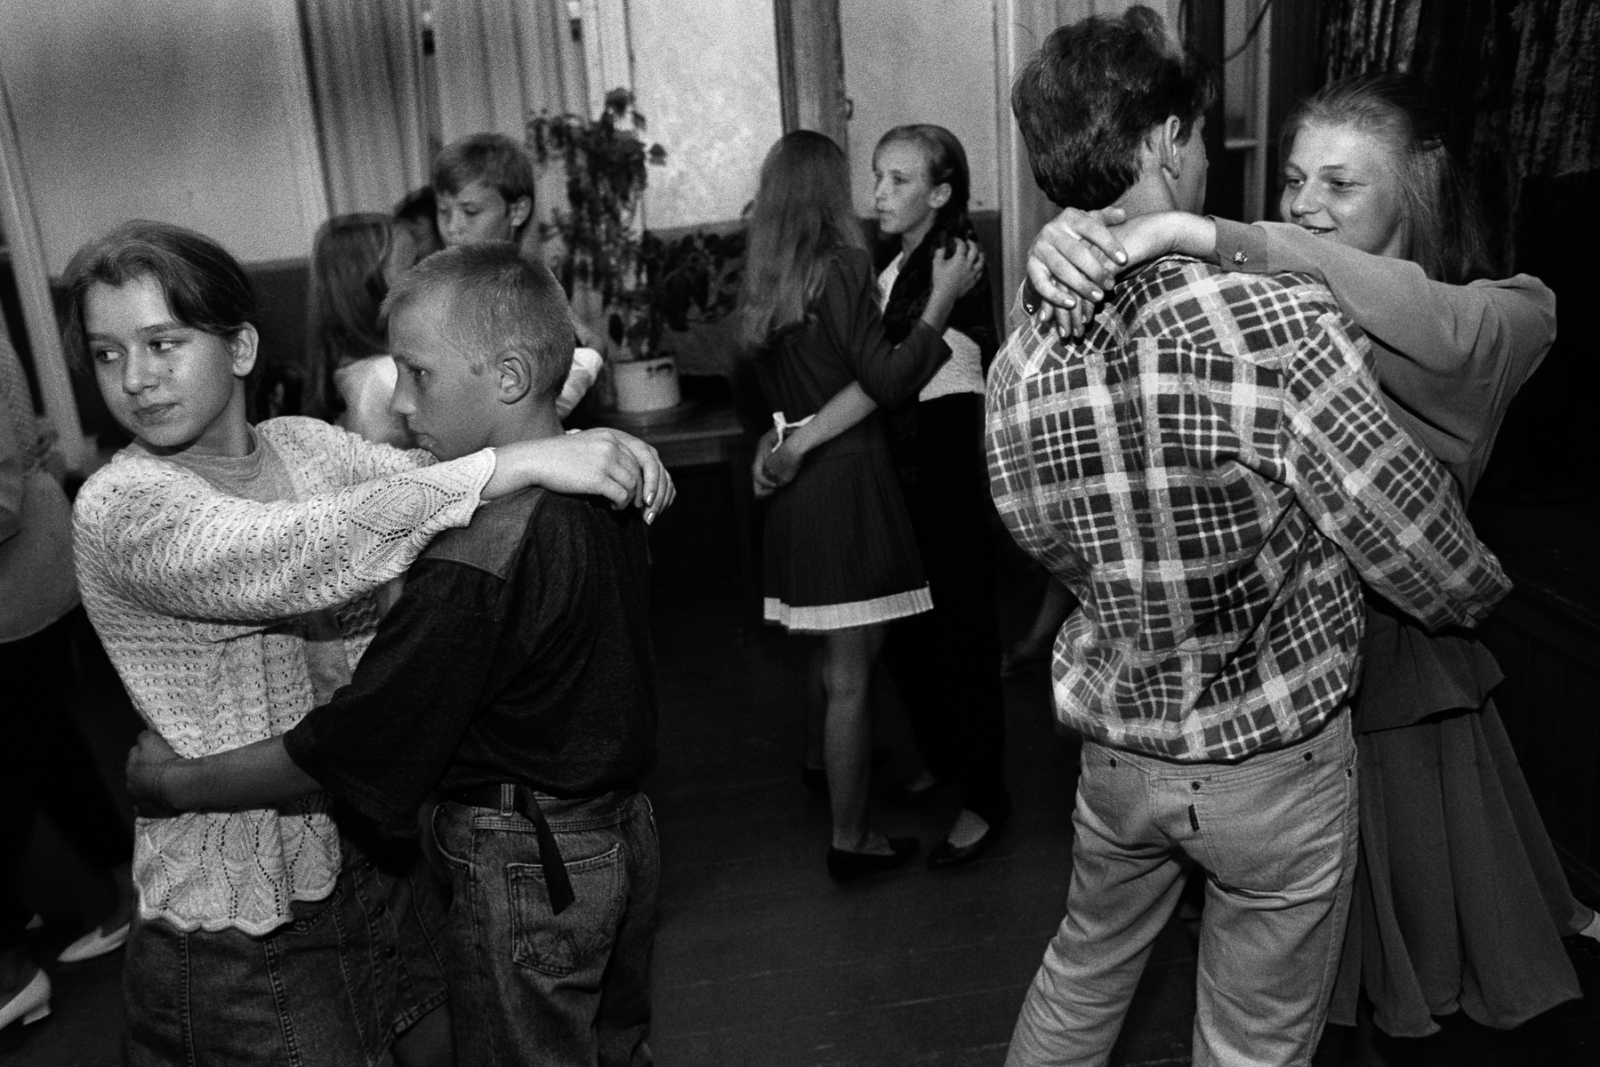 Russia - The Village of Anufrievo - Sveta (at far right) and other children dance on Elijah's...